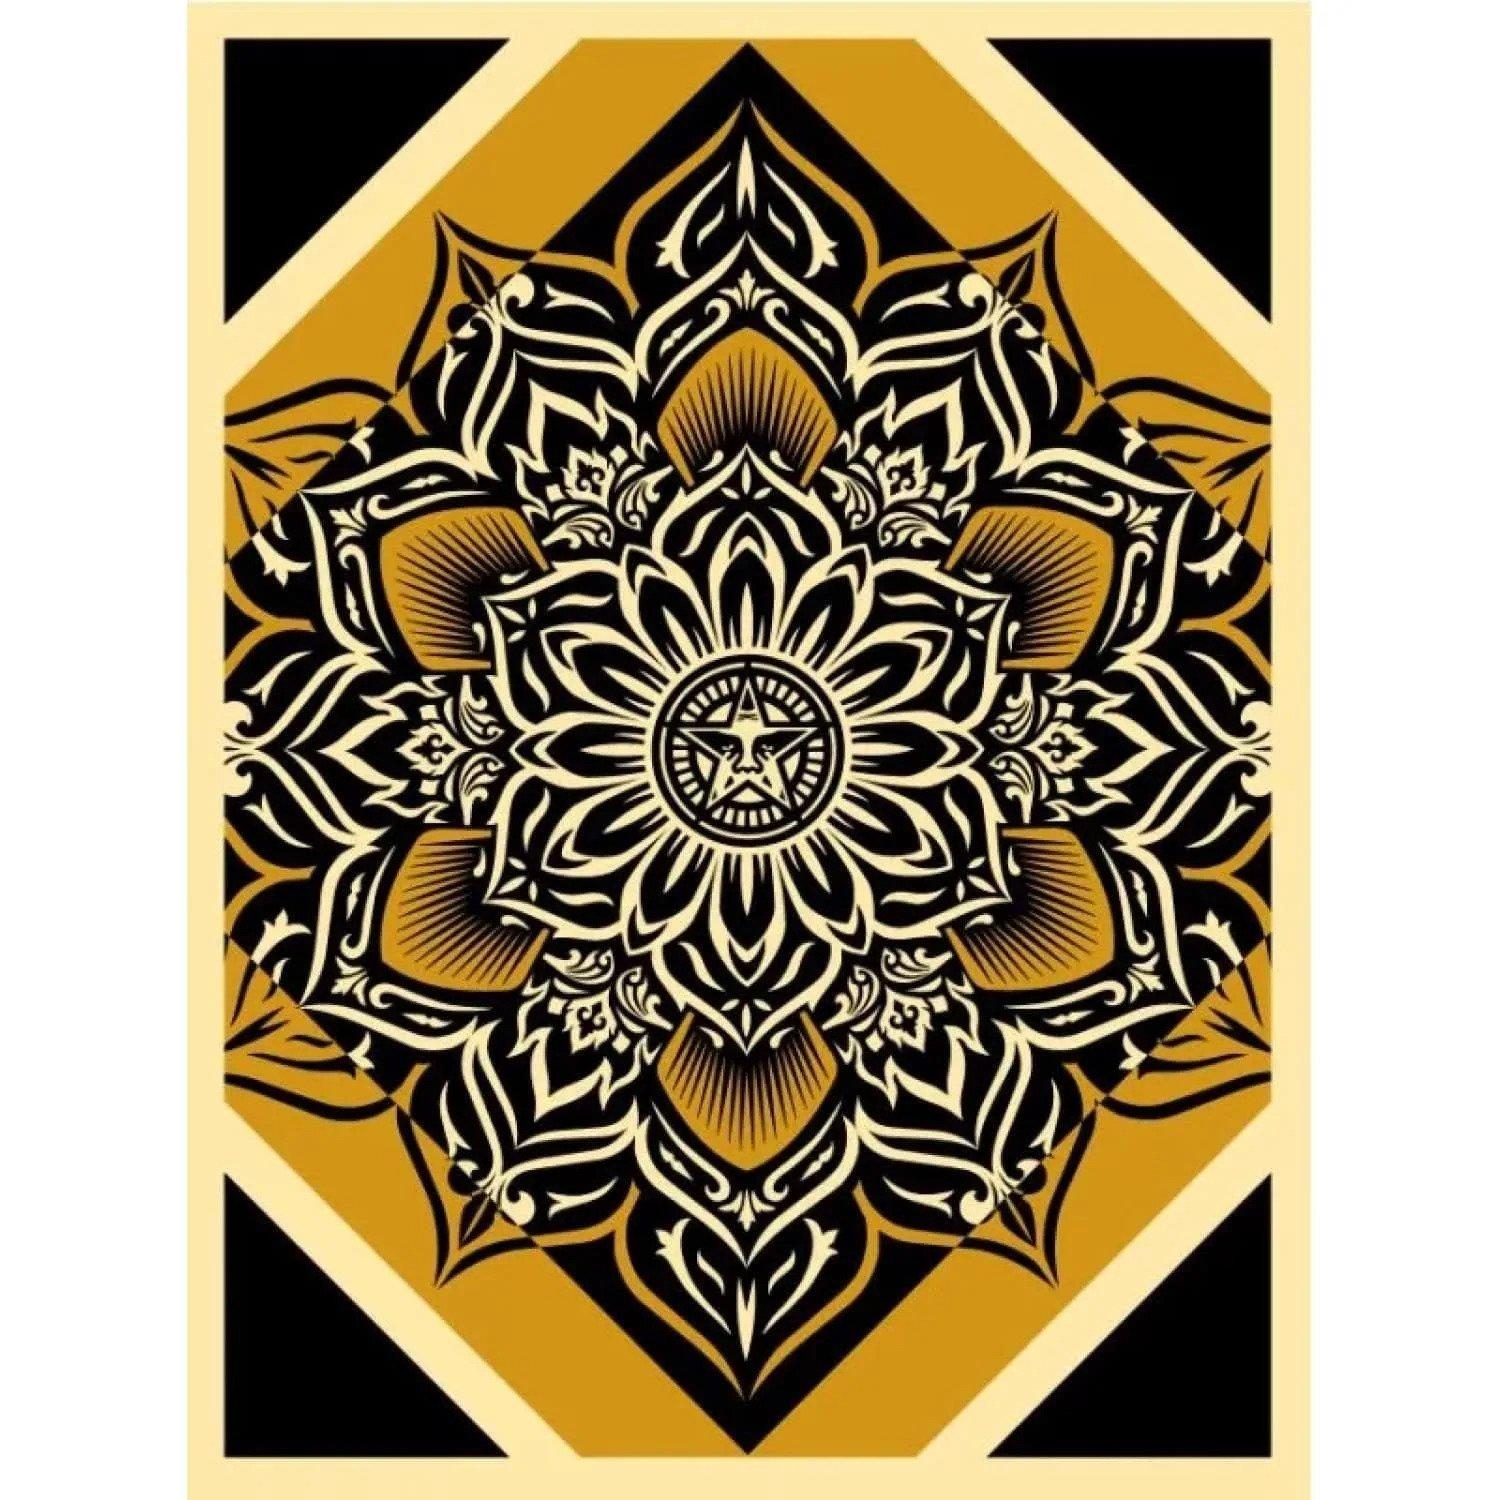 Lotus Diamond (Gold)

By Shepard Fairey

2011

Shepard Fairey is a prominent street artist and graphic designer celebrated for his iconic "Hope" poster of Barack Obama and his pioneering work in promoting social and political activism through